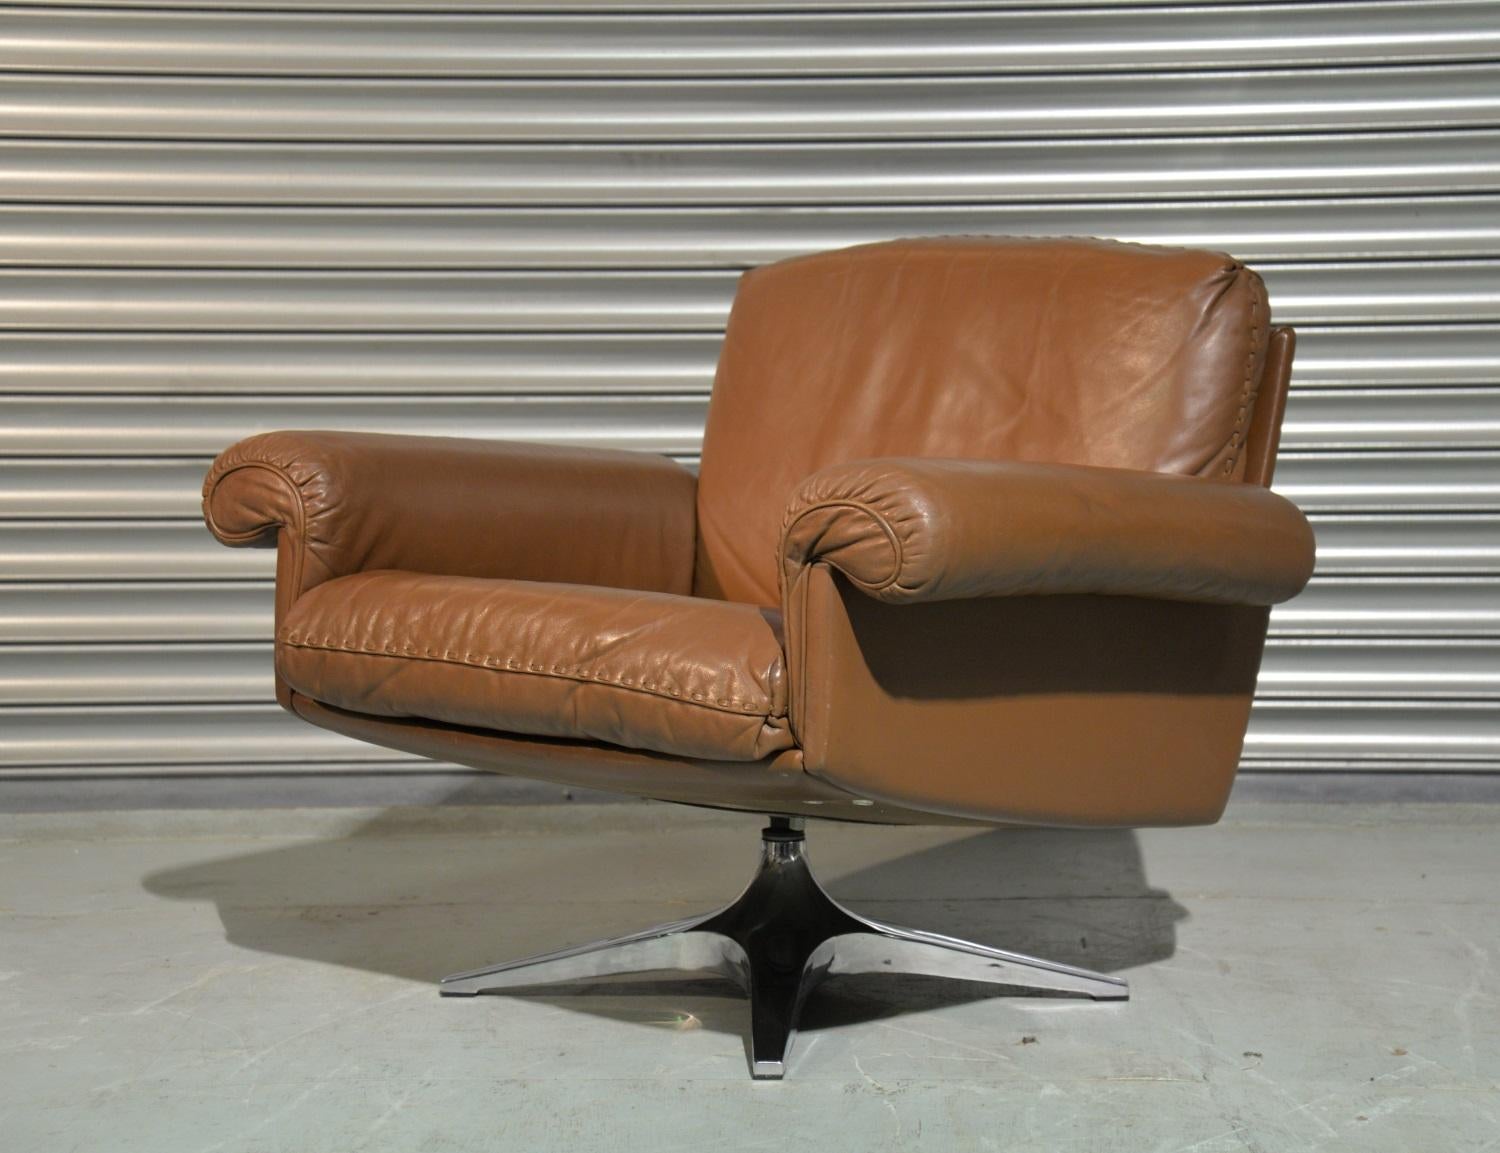 We are delighted to bring to you a vintage 1970s De Sede DS 31 lounge armchair in soft brown aniline leather with superb whipstitch edge detail. This swivel lounge club armchair was hand built circa 1970s by De Sede craftsman in Switzerland and